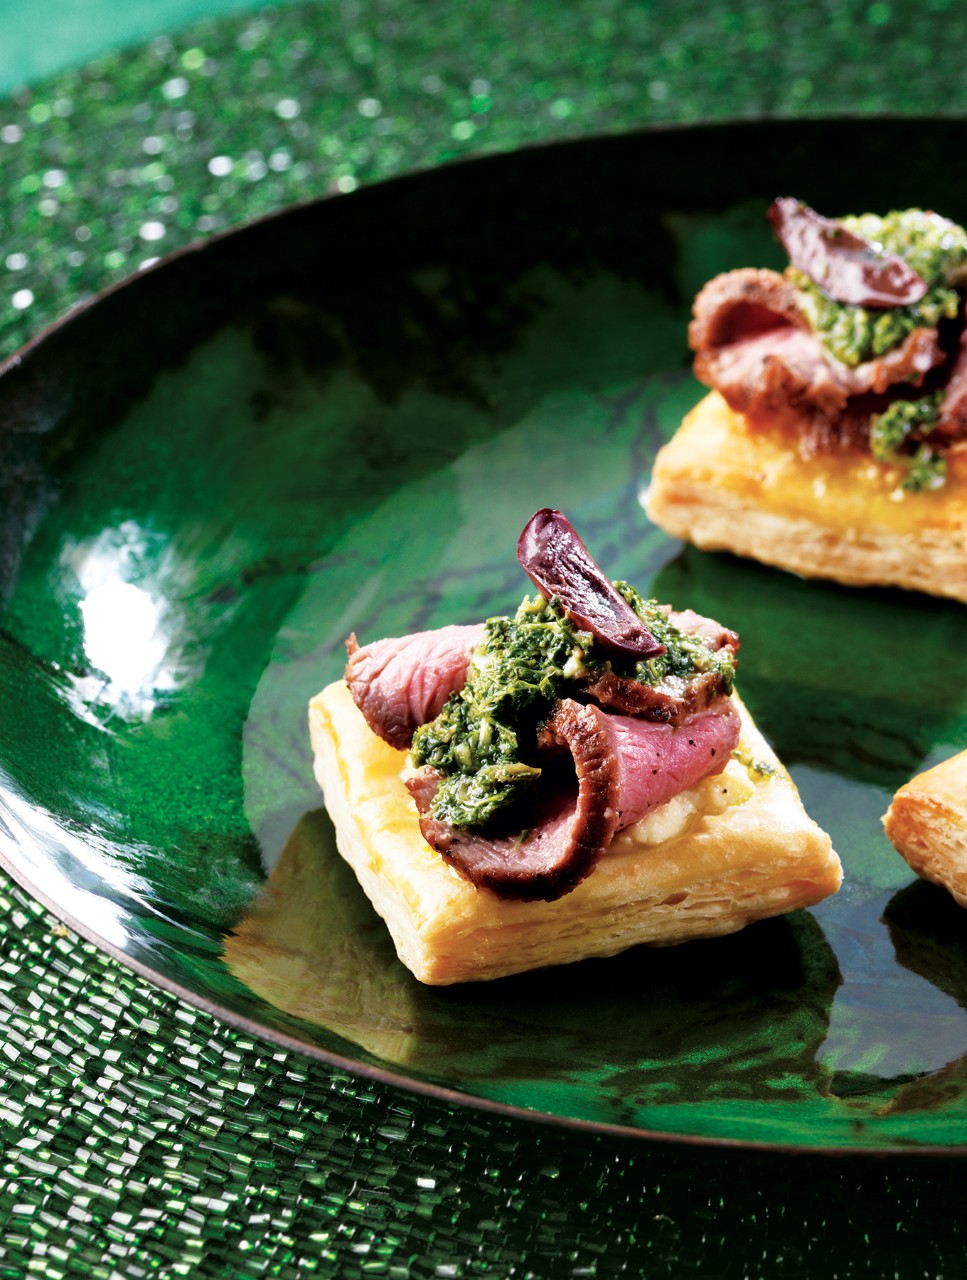 Minted Lamb Loin on Puff Pastry Squares